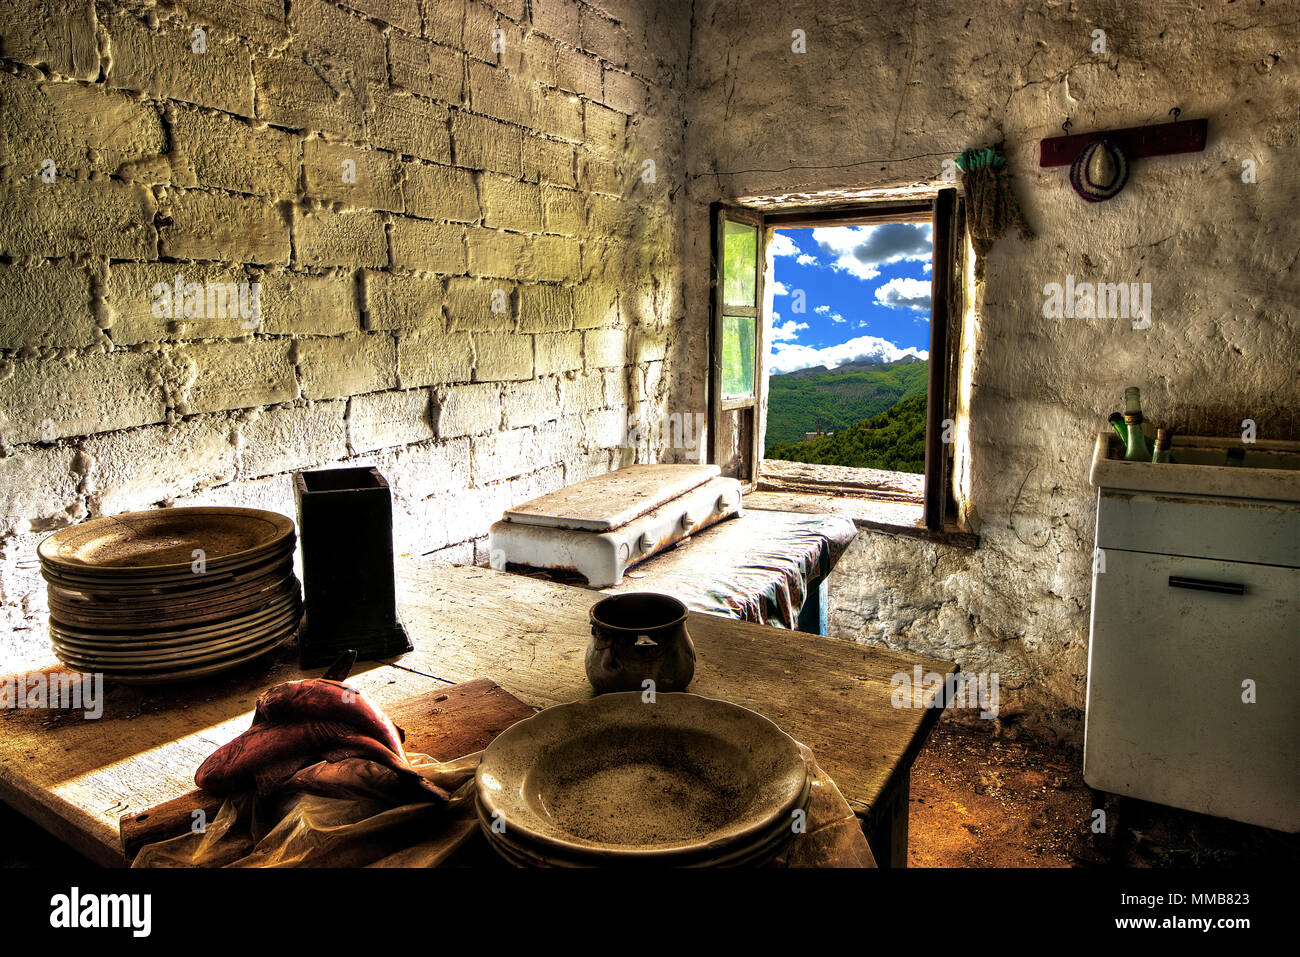 Room with a view -  Abandoned house kitchen in the alpine village of Mindino, municipality of Garessio,Cuneo province, Piedmont, North Italy, Europe. Stock Photo